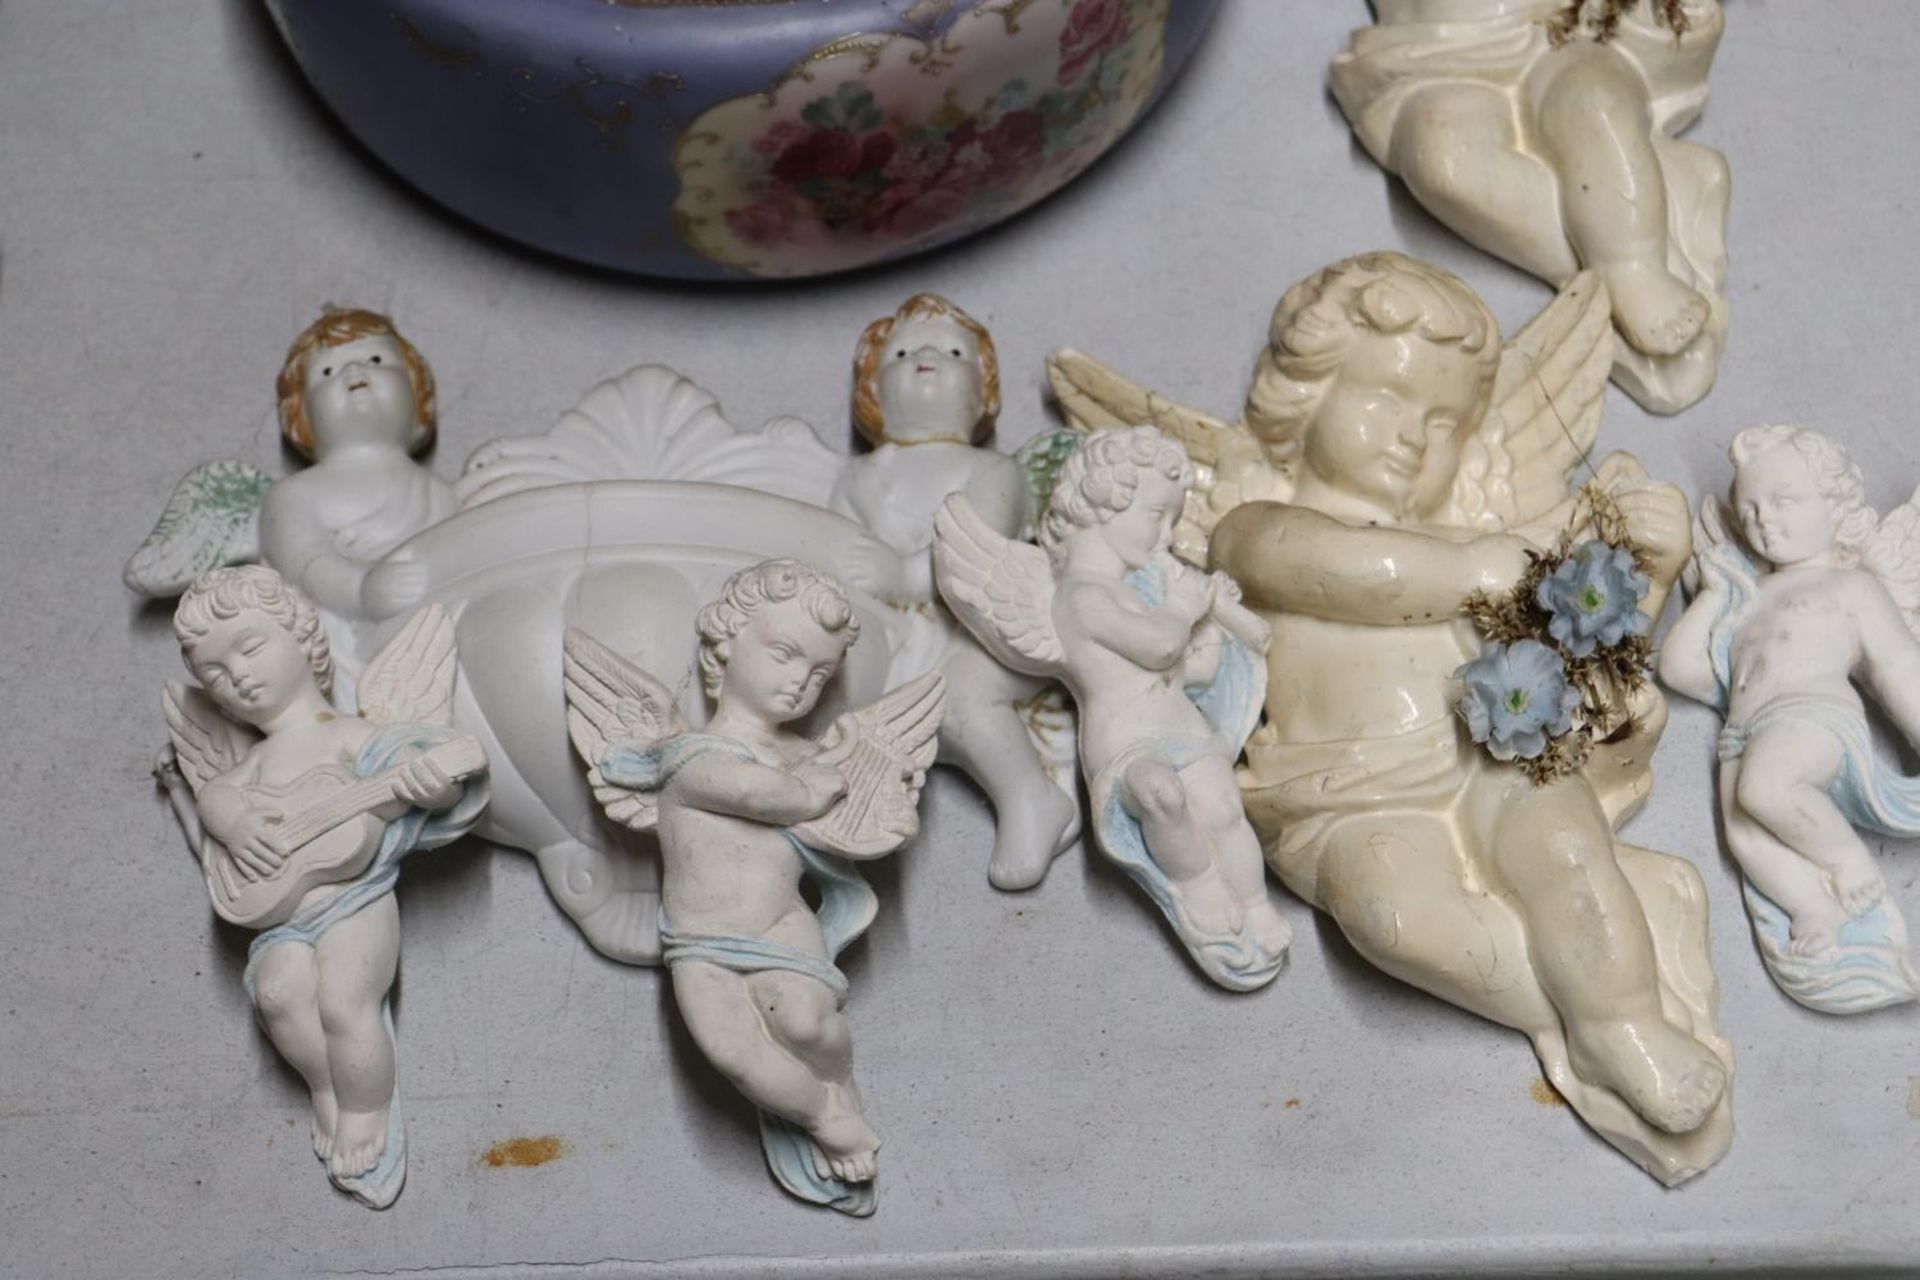 A MIXED LOT TO INCLUDE "ANGEL" WALL PLAQUES, A SWAN TEA POT, STAFFORDSHIRE FIGURE OF "ELIJAH" (A/ - Image 2 of 6